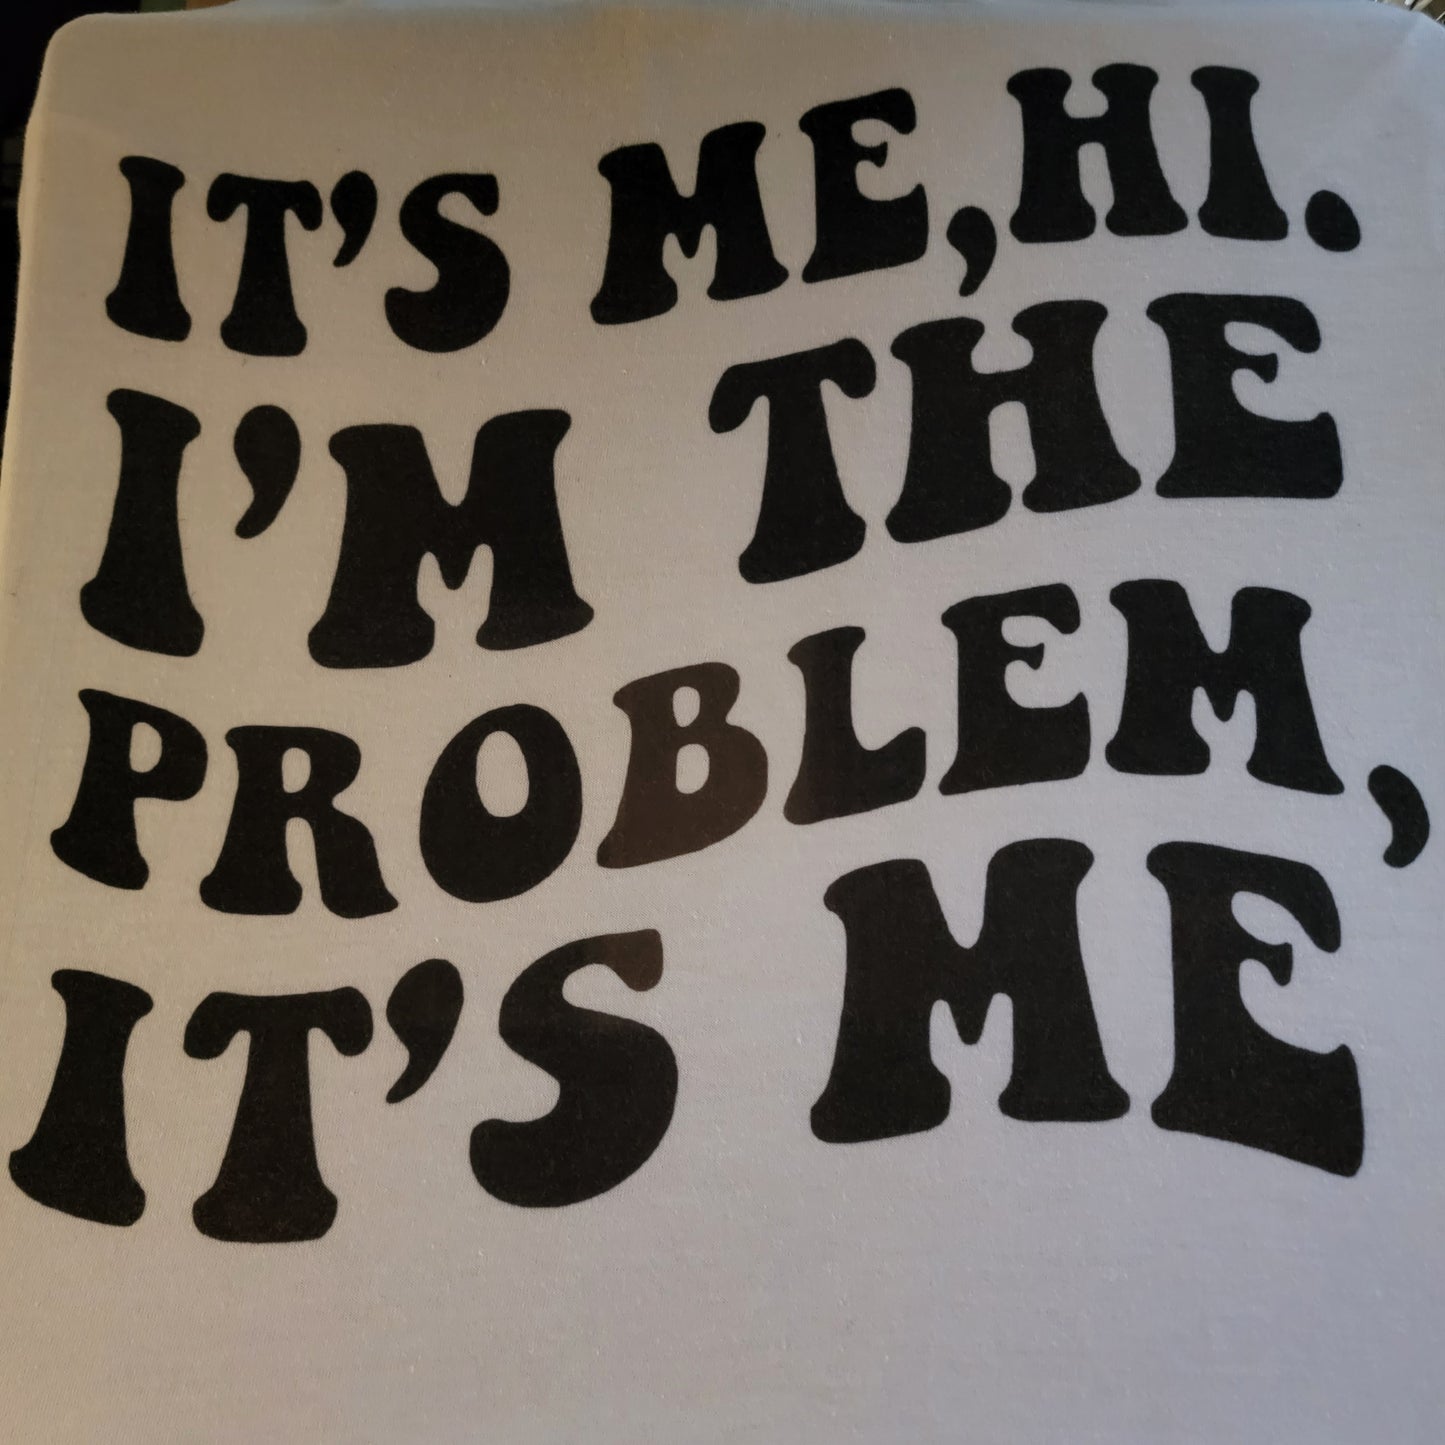 Im The Problem Groovy Graphic Tee Shirt